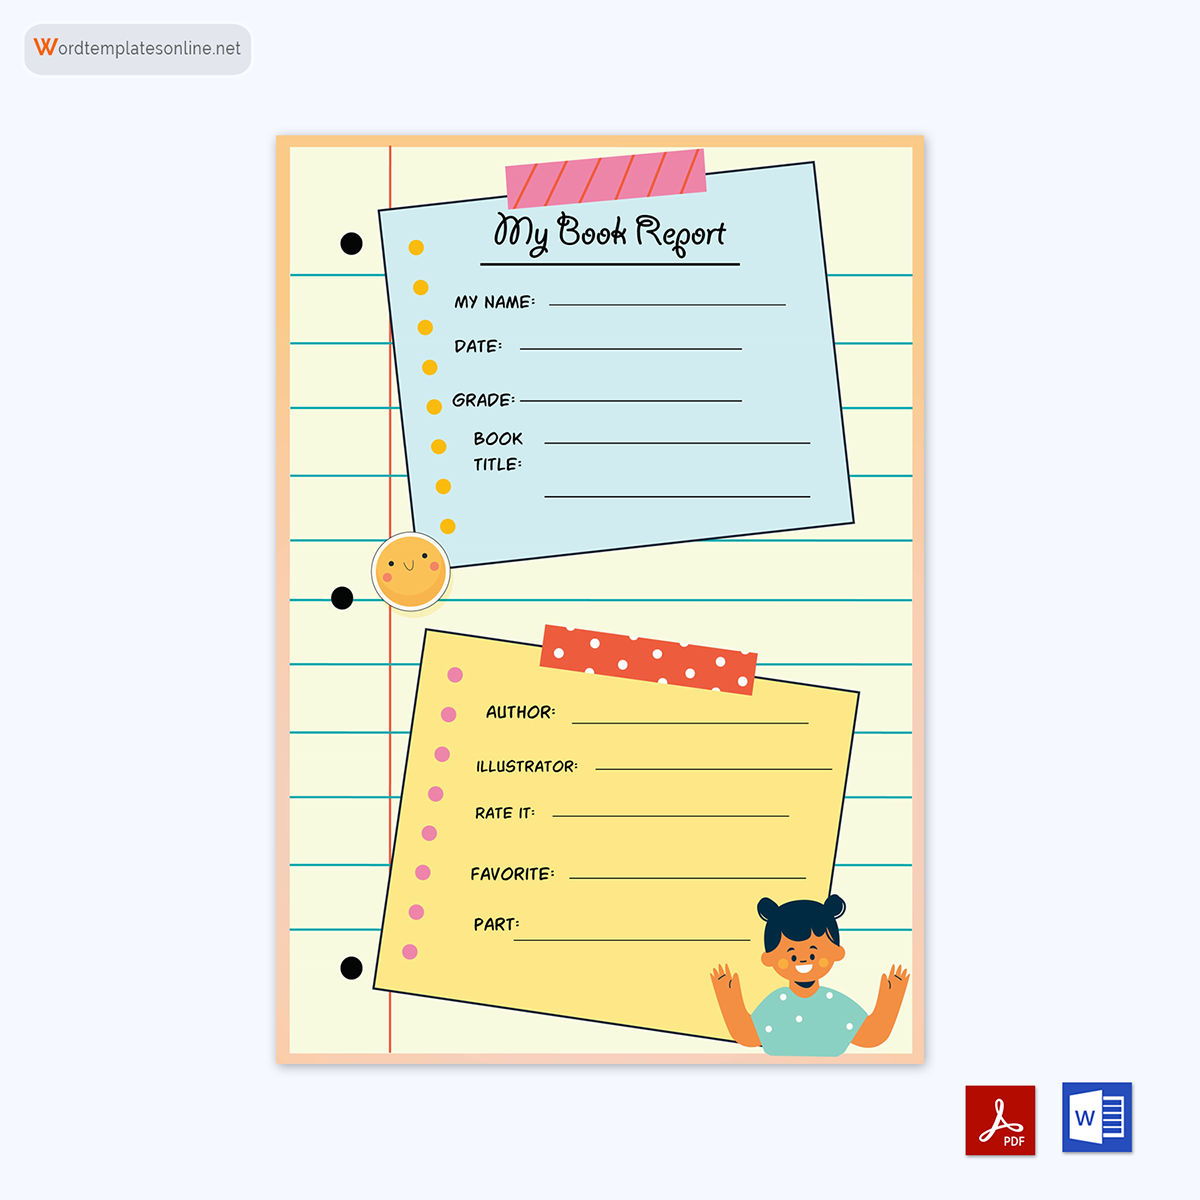 Format for Book Report Template: Free